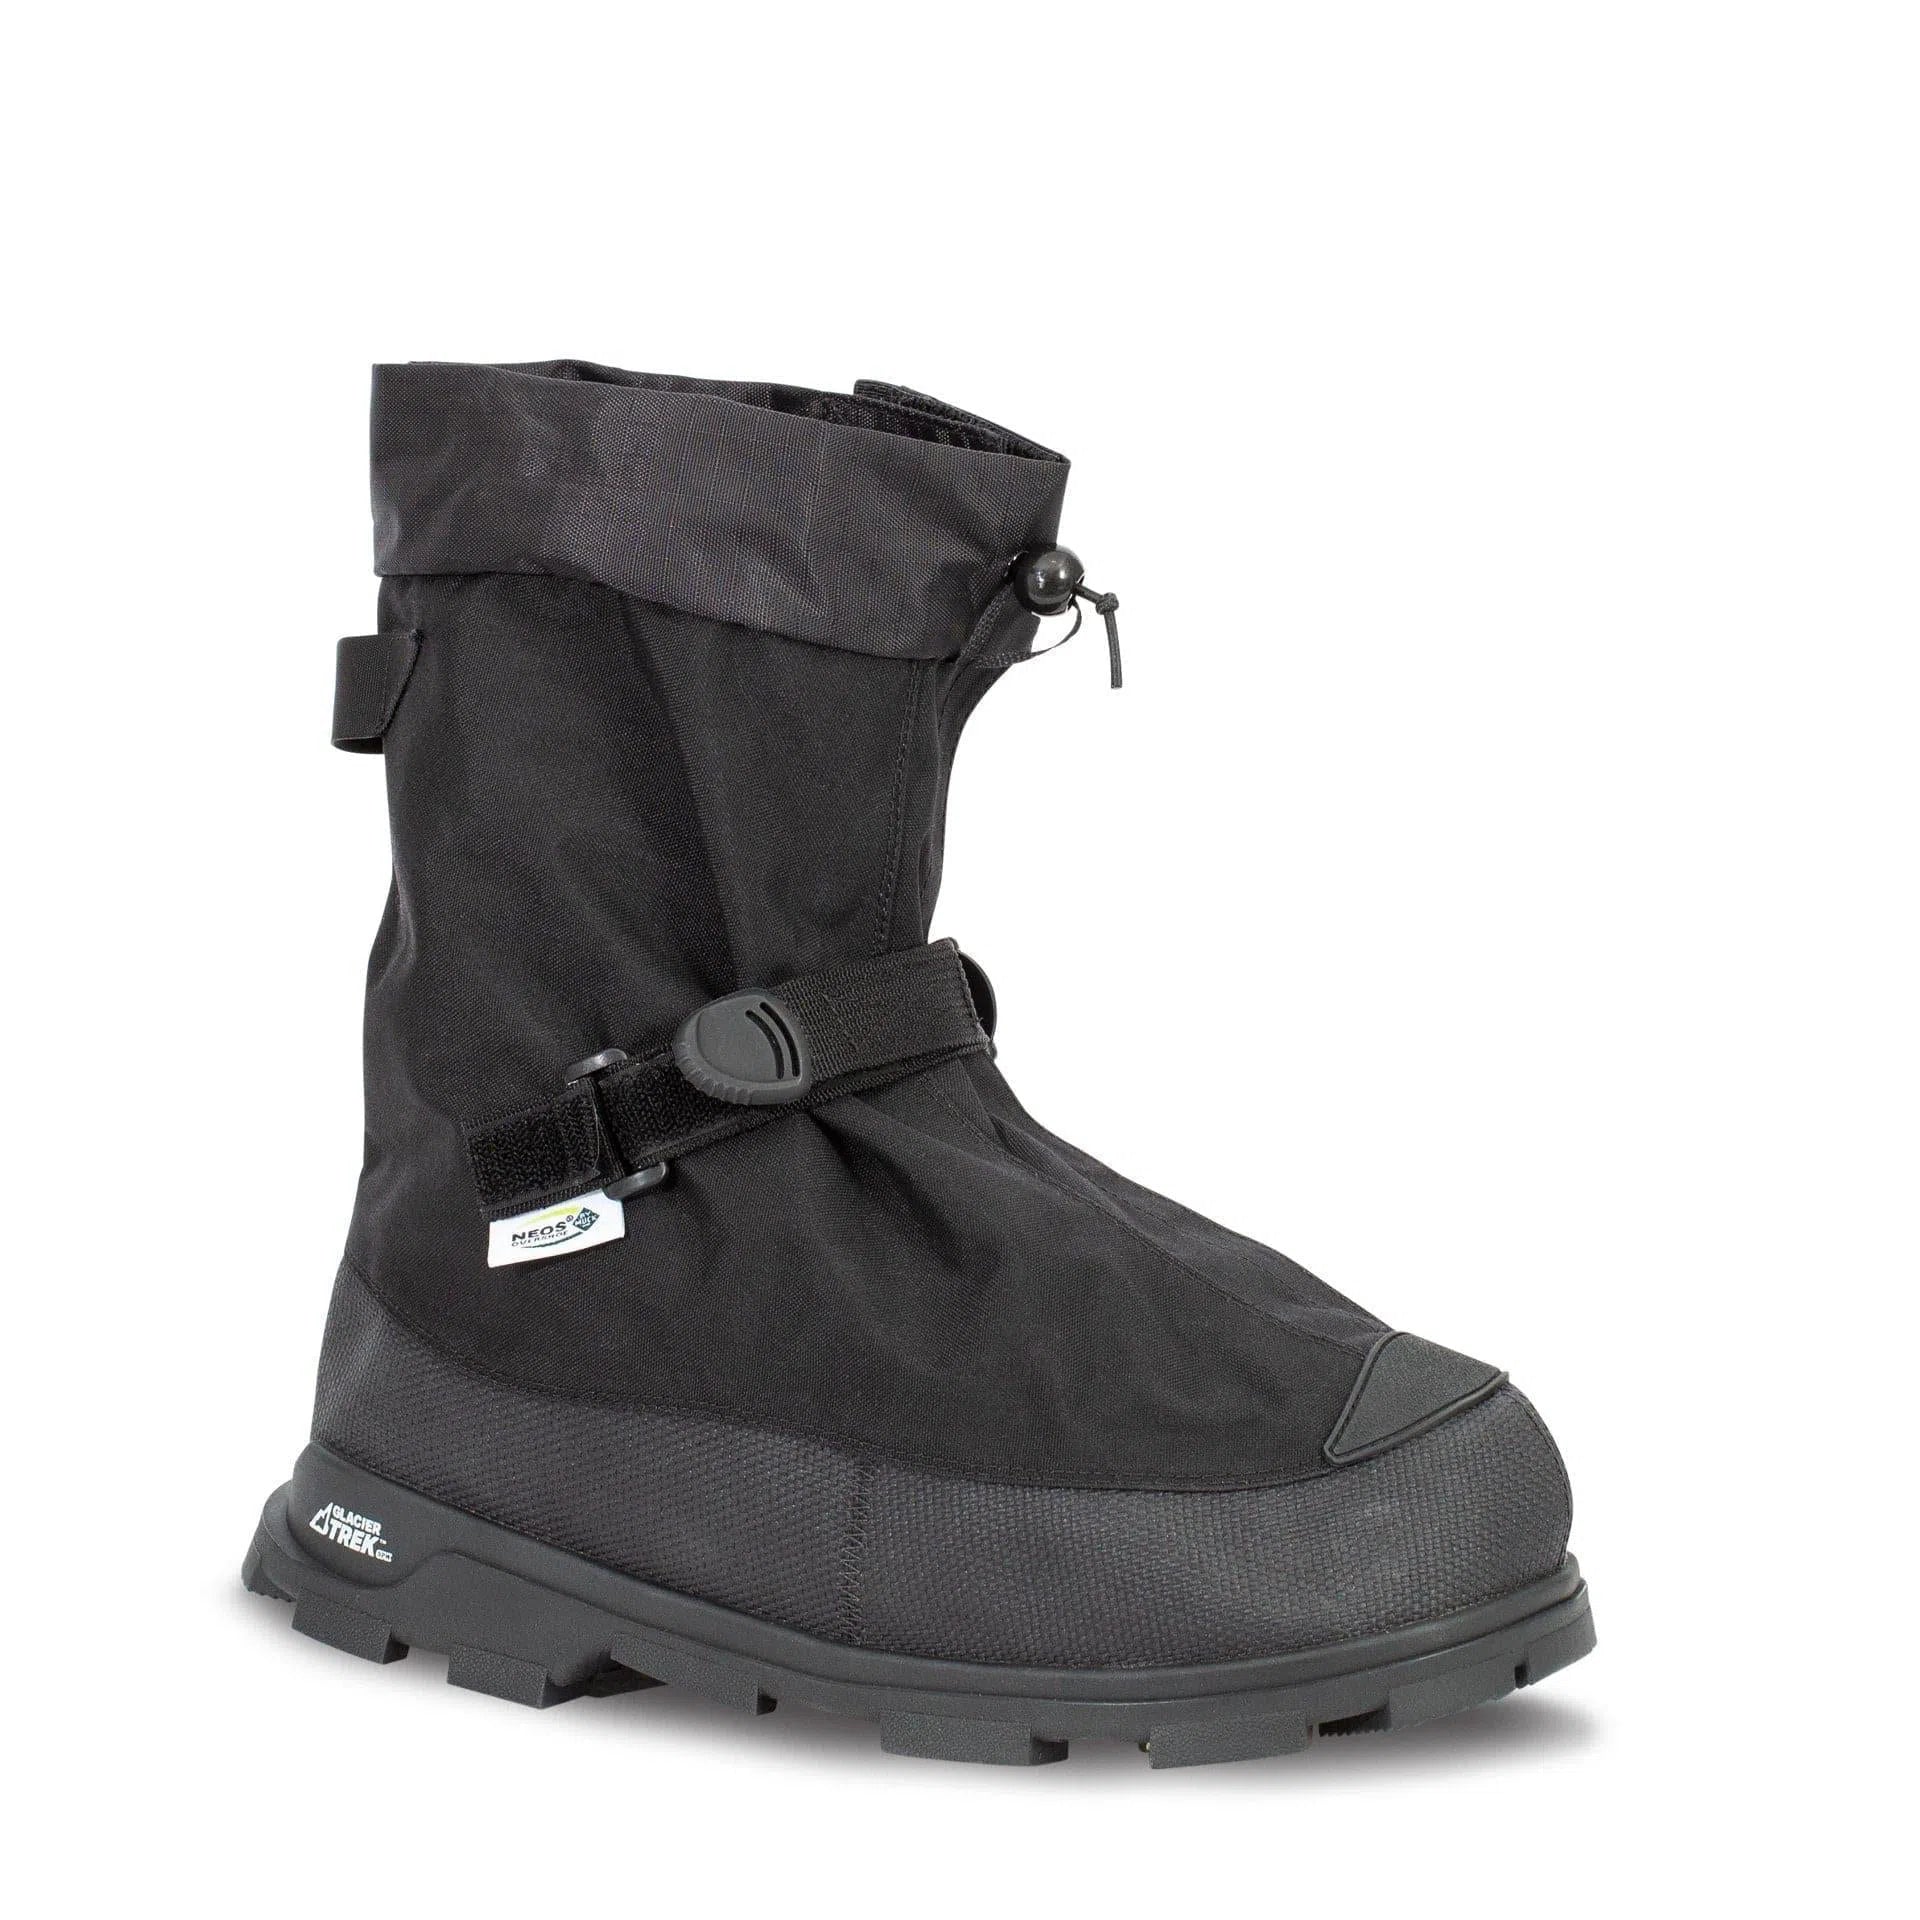 NEOS Shoe Cover (Crampons) - VNG1HEEL